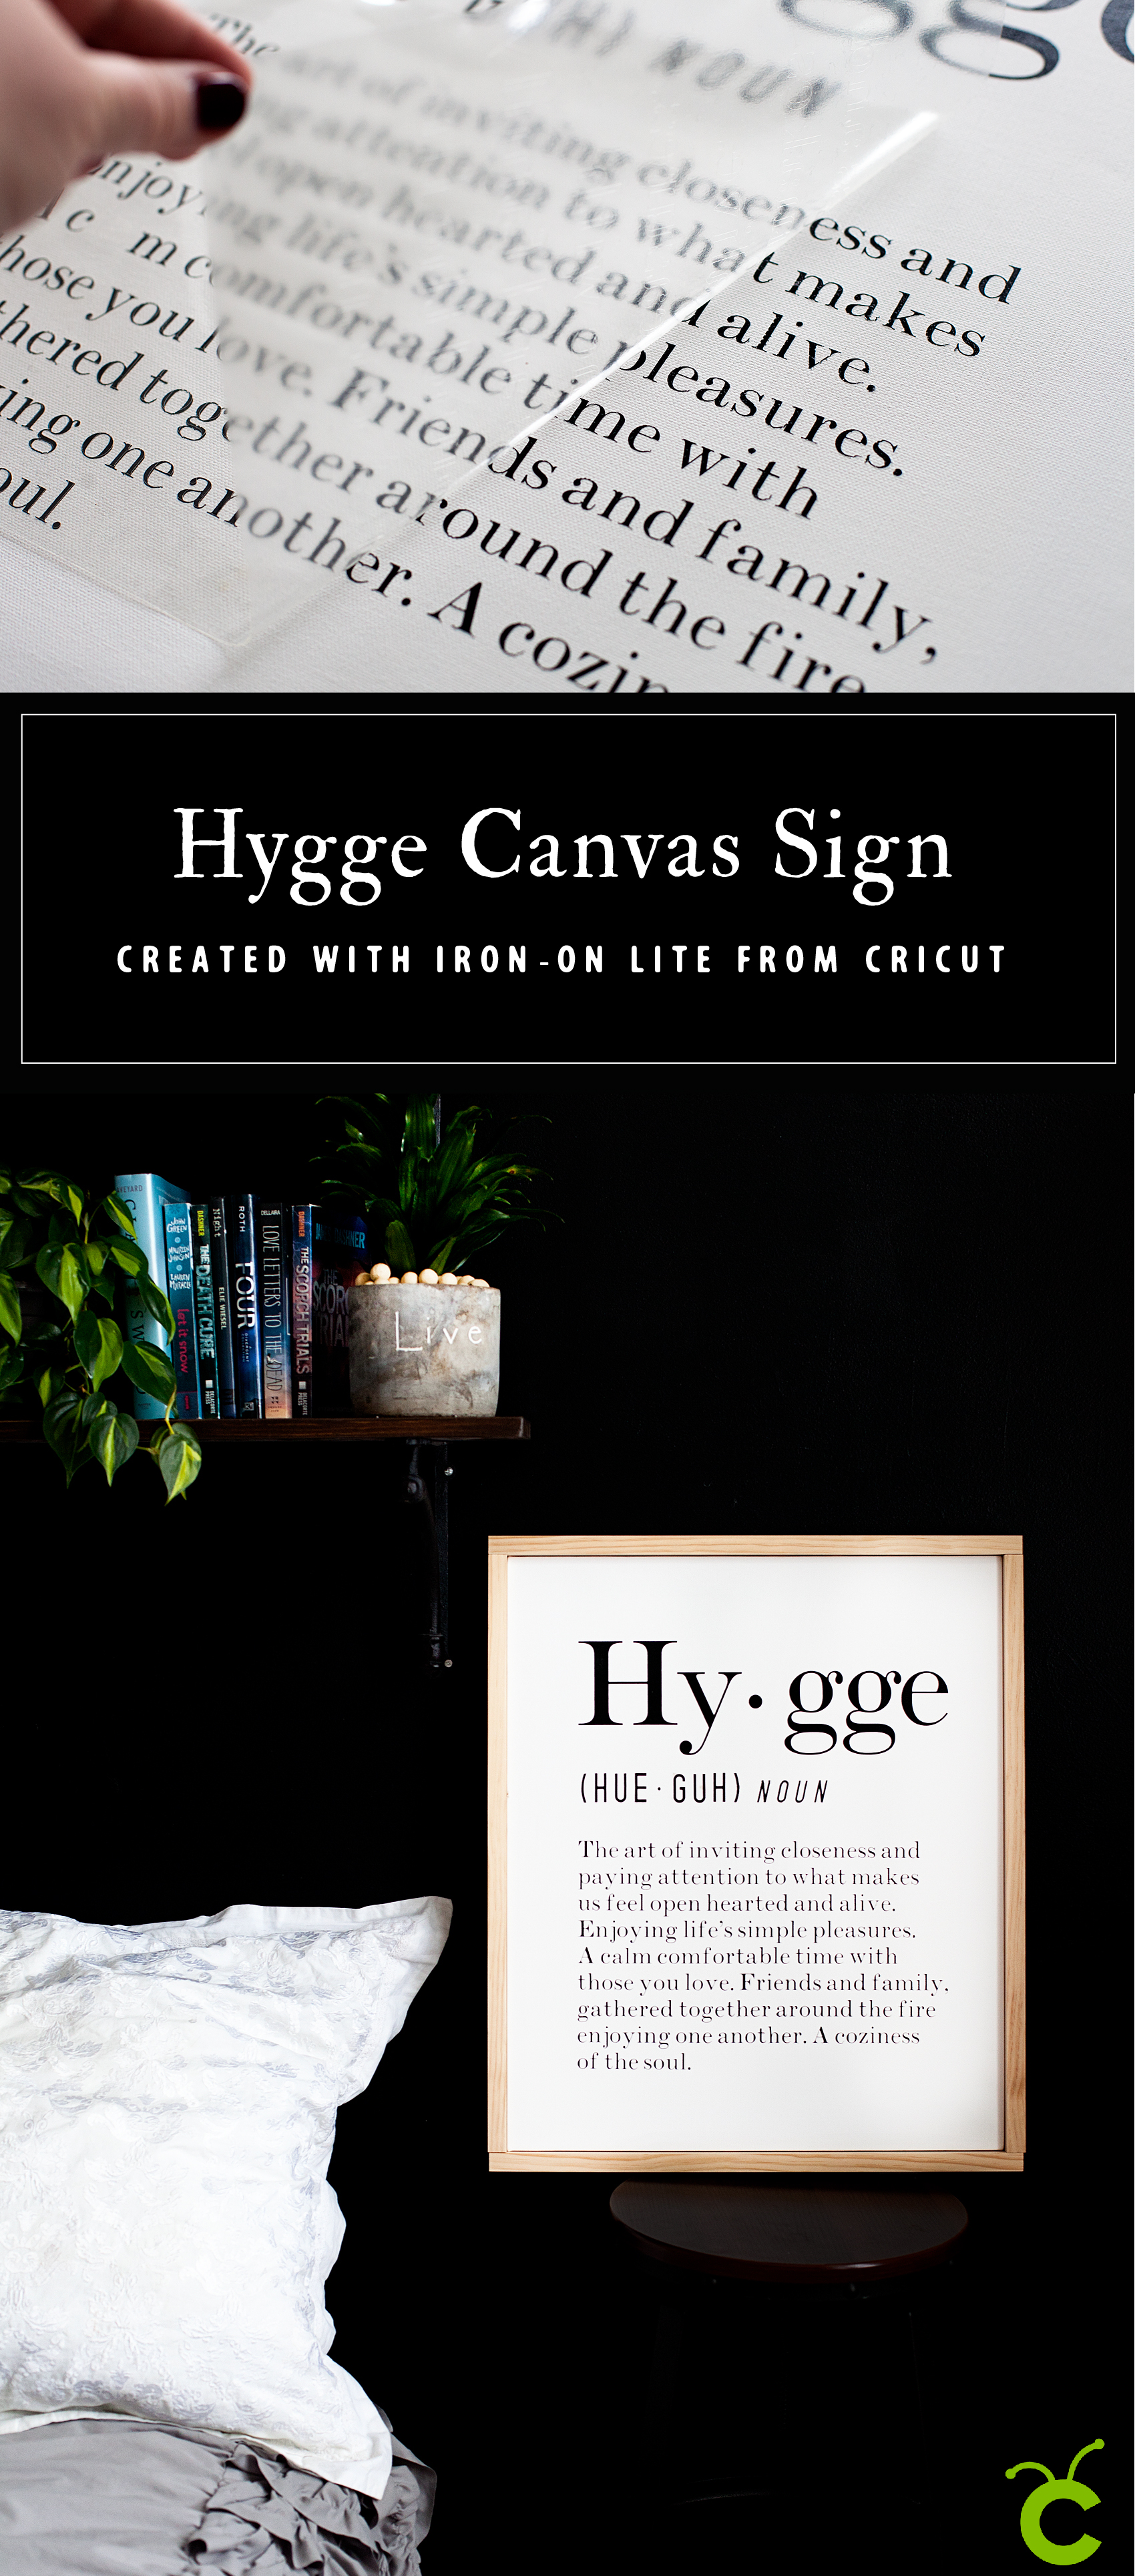 Hygge Canvas Sign designed by WhipperBerry and created with @cricut Iron-On lite along with the Cricut Easy Press. Did you know that you can make beautiful signs with heat transfer vinyl like the Cricut Iron-On Lite? It’s super EASY come on over to WhipperBerry to learn how in my Sign Making 101 series + You can learn all about the magic of the Danish concept of Hygge!